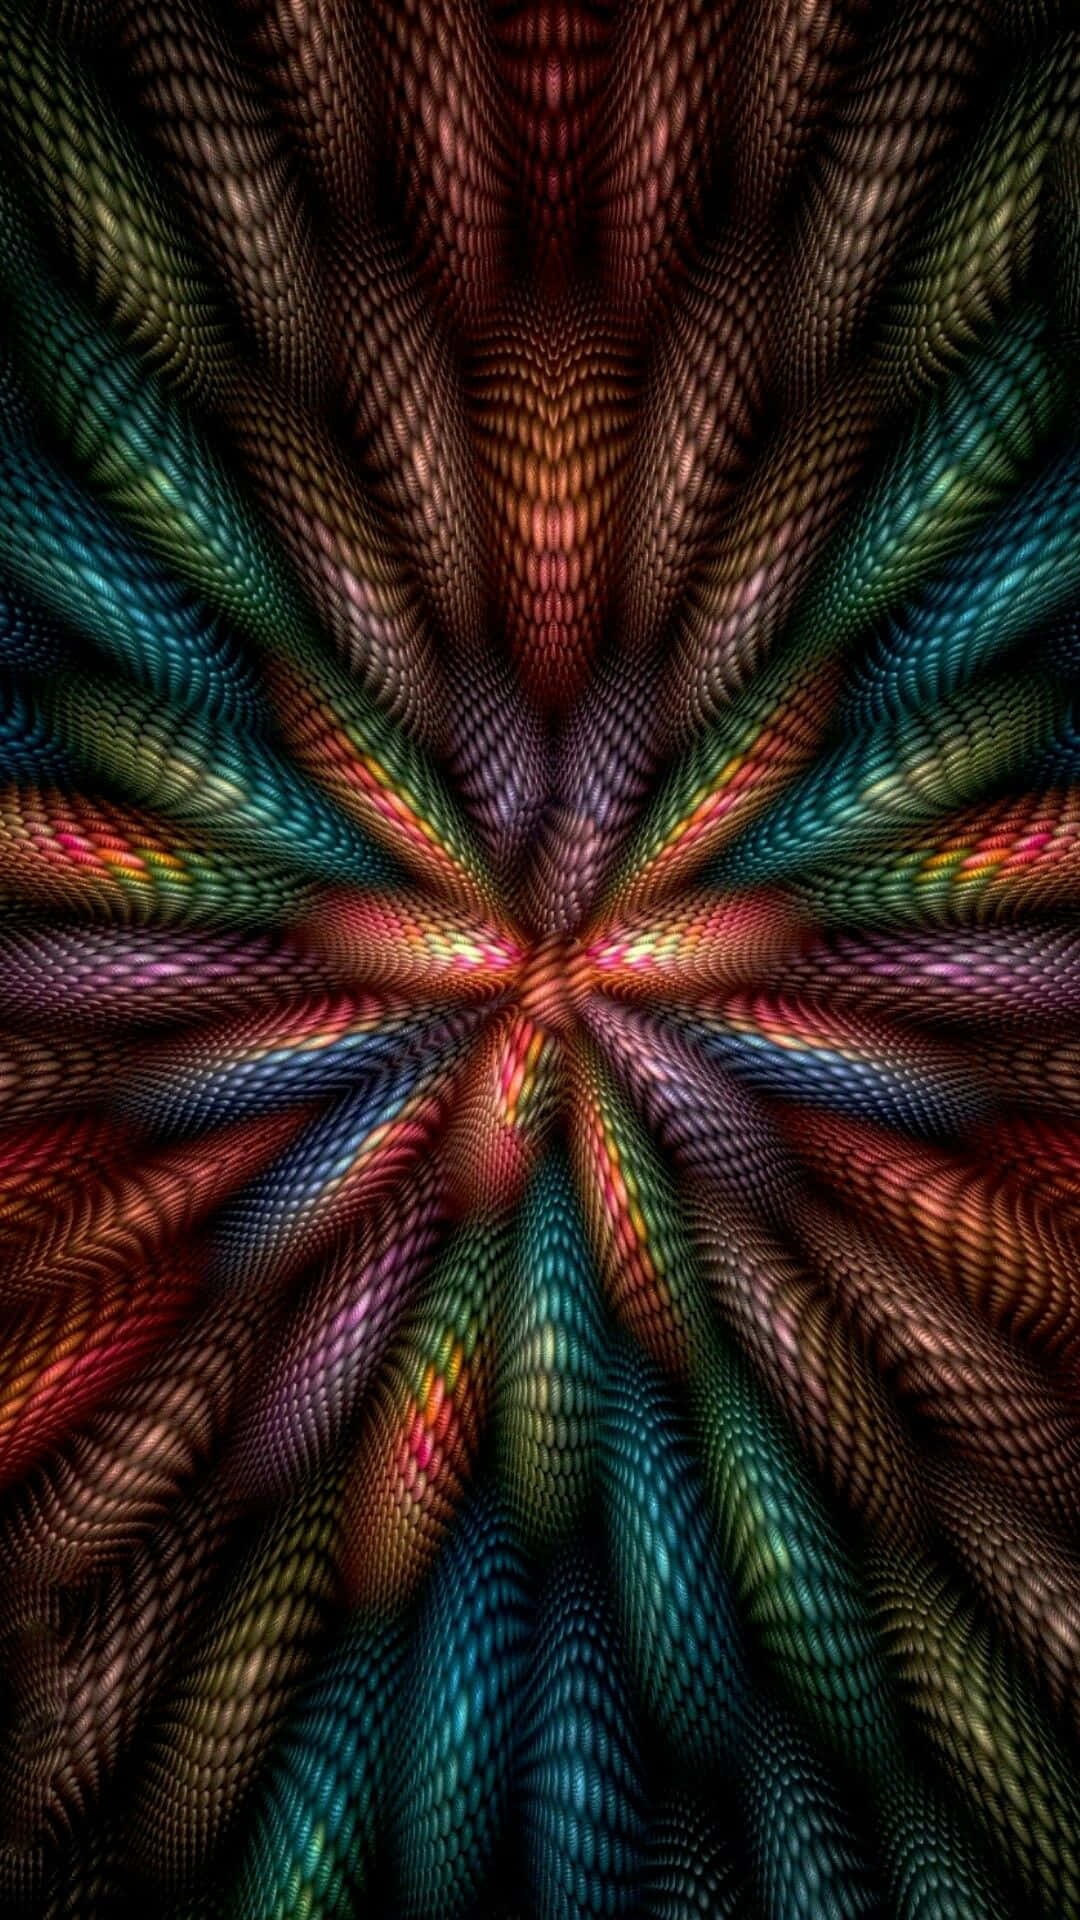 Mesmerizing Fractal Patterns in Vibrant Colors Wallpaper